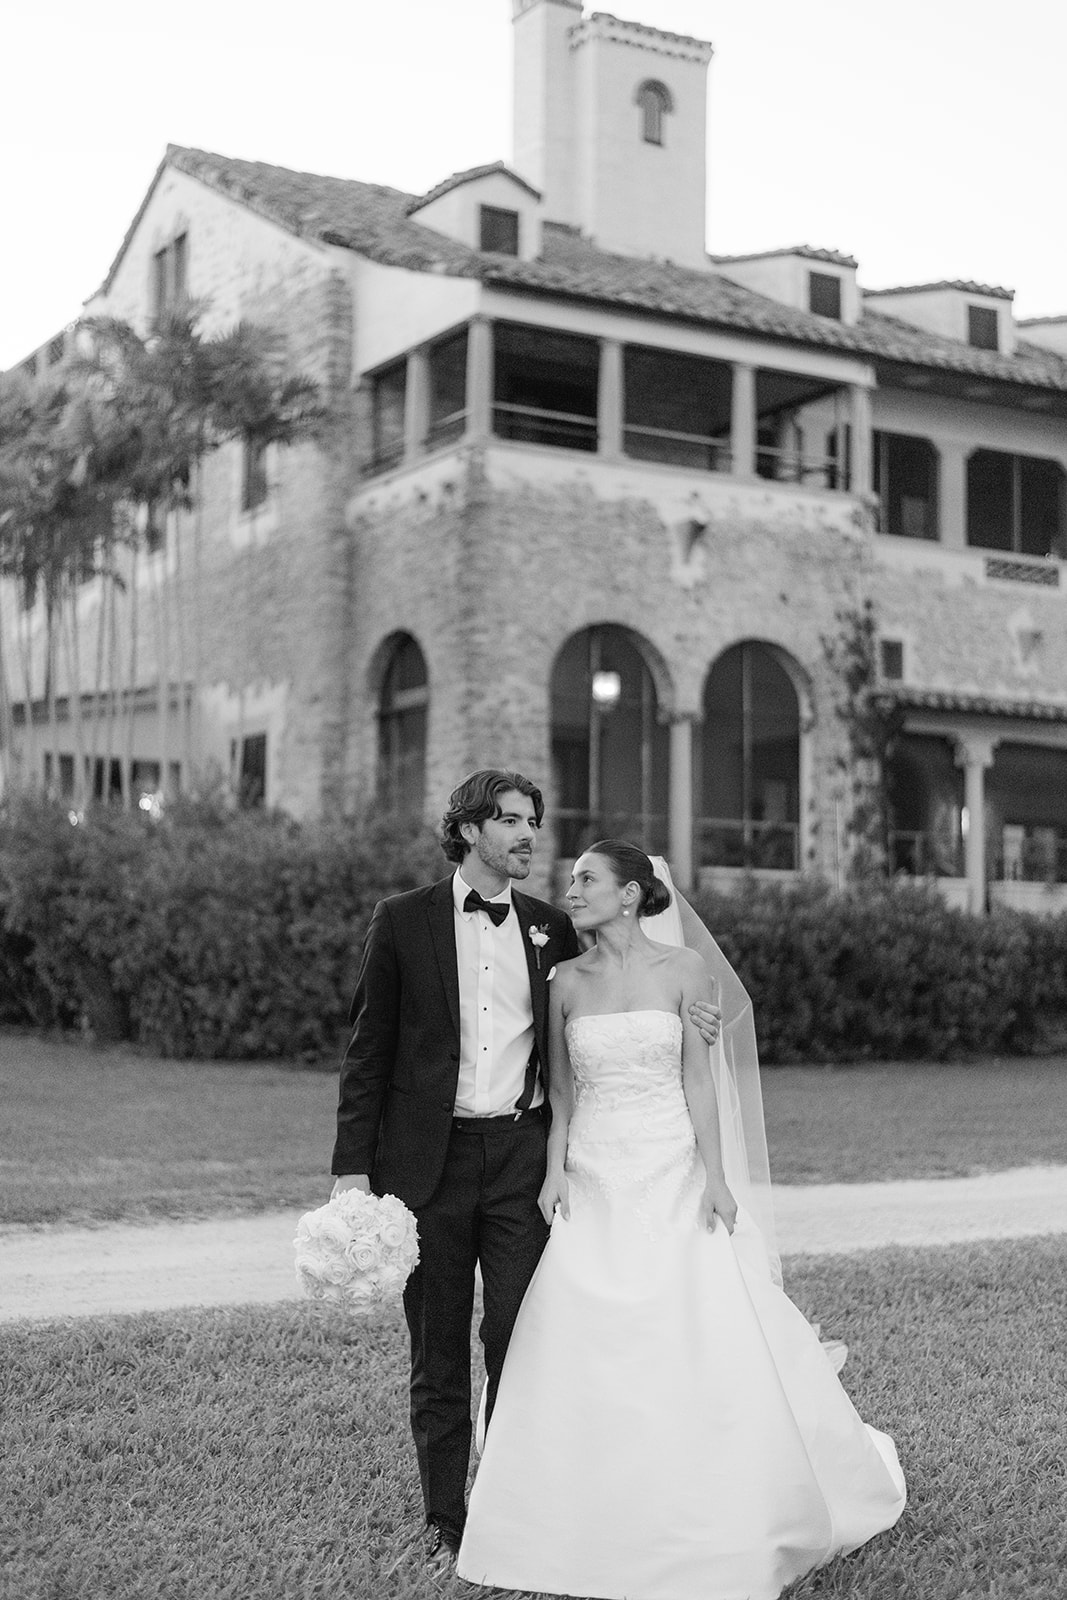 A love story told through Deering Estate Wedding Photography in Miami Florida
